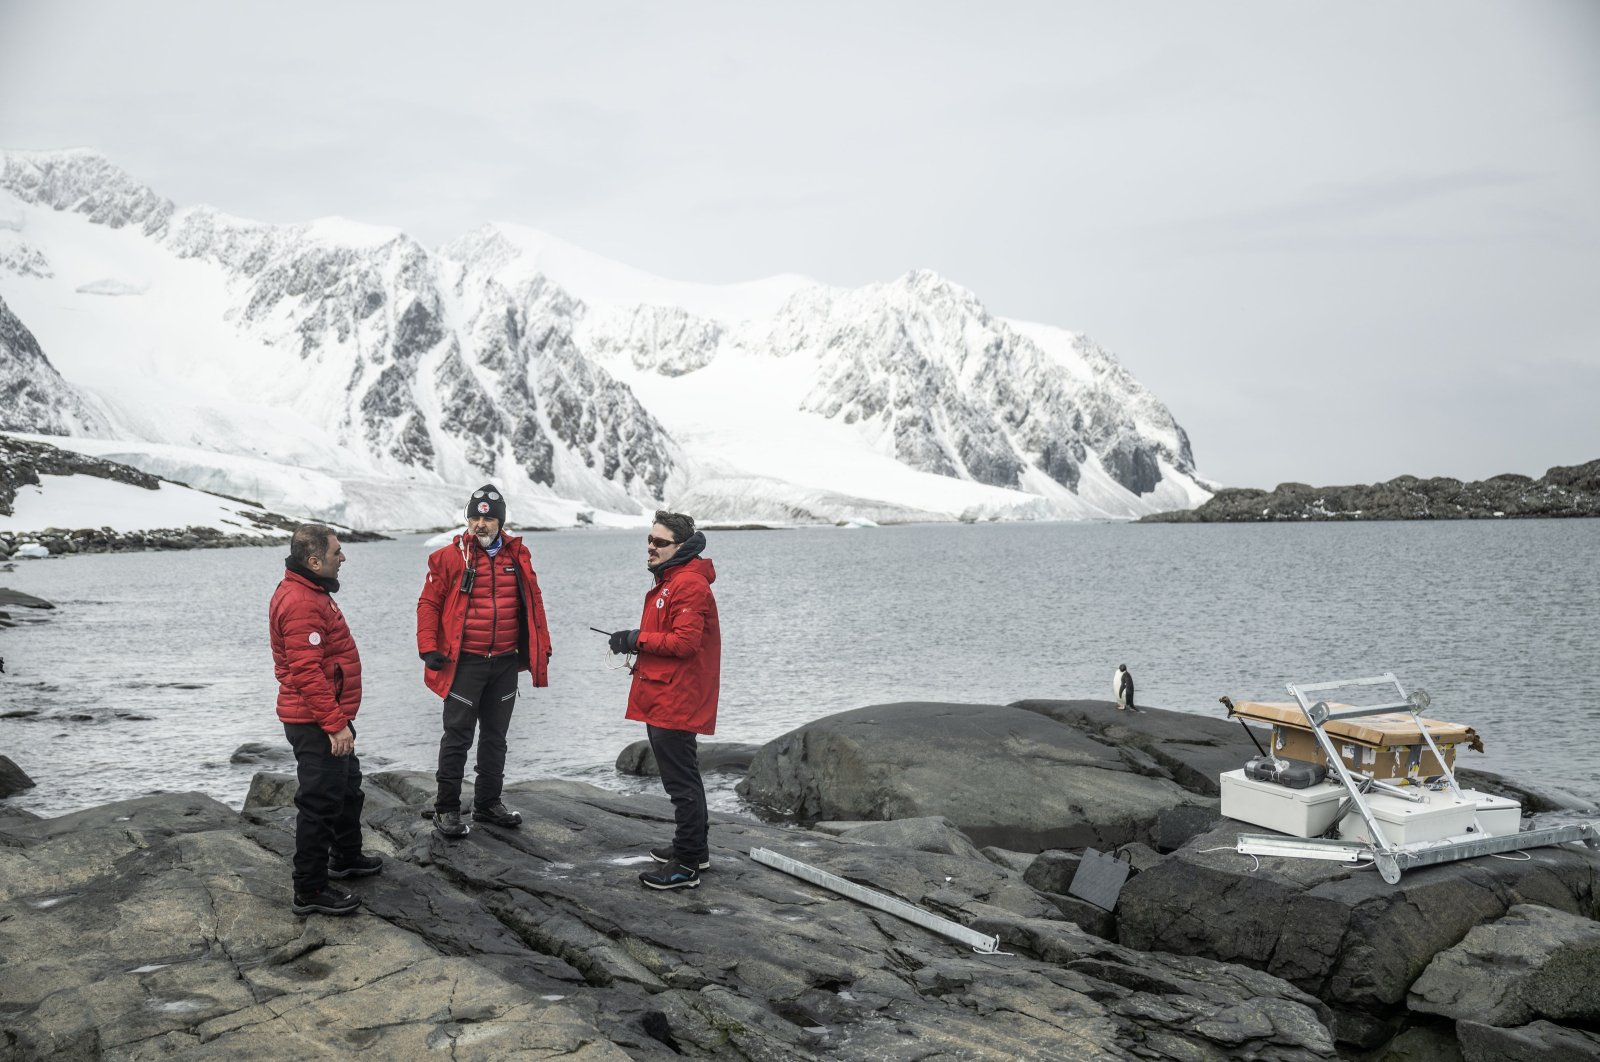 Exploring New Research: Turkish Science Camp in Antarctica